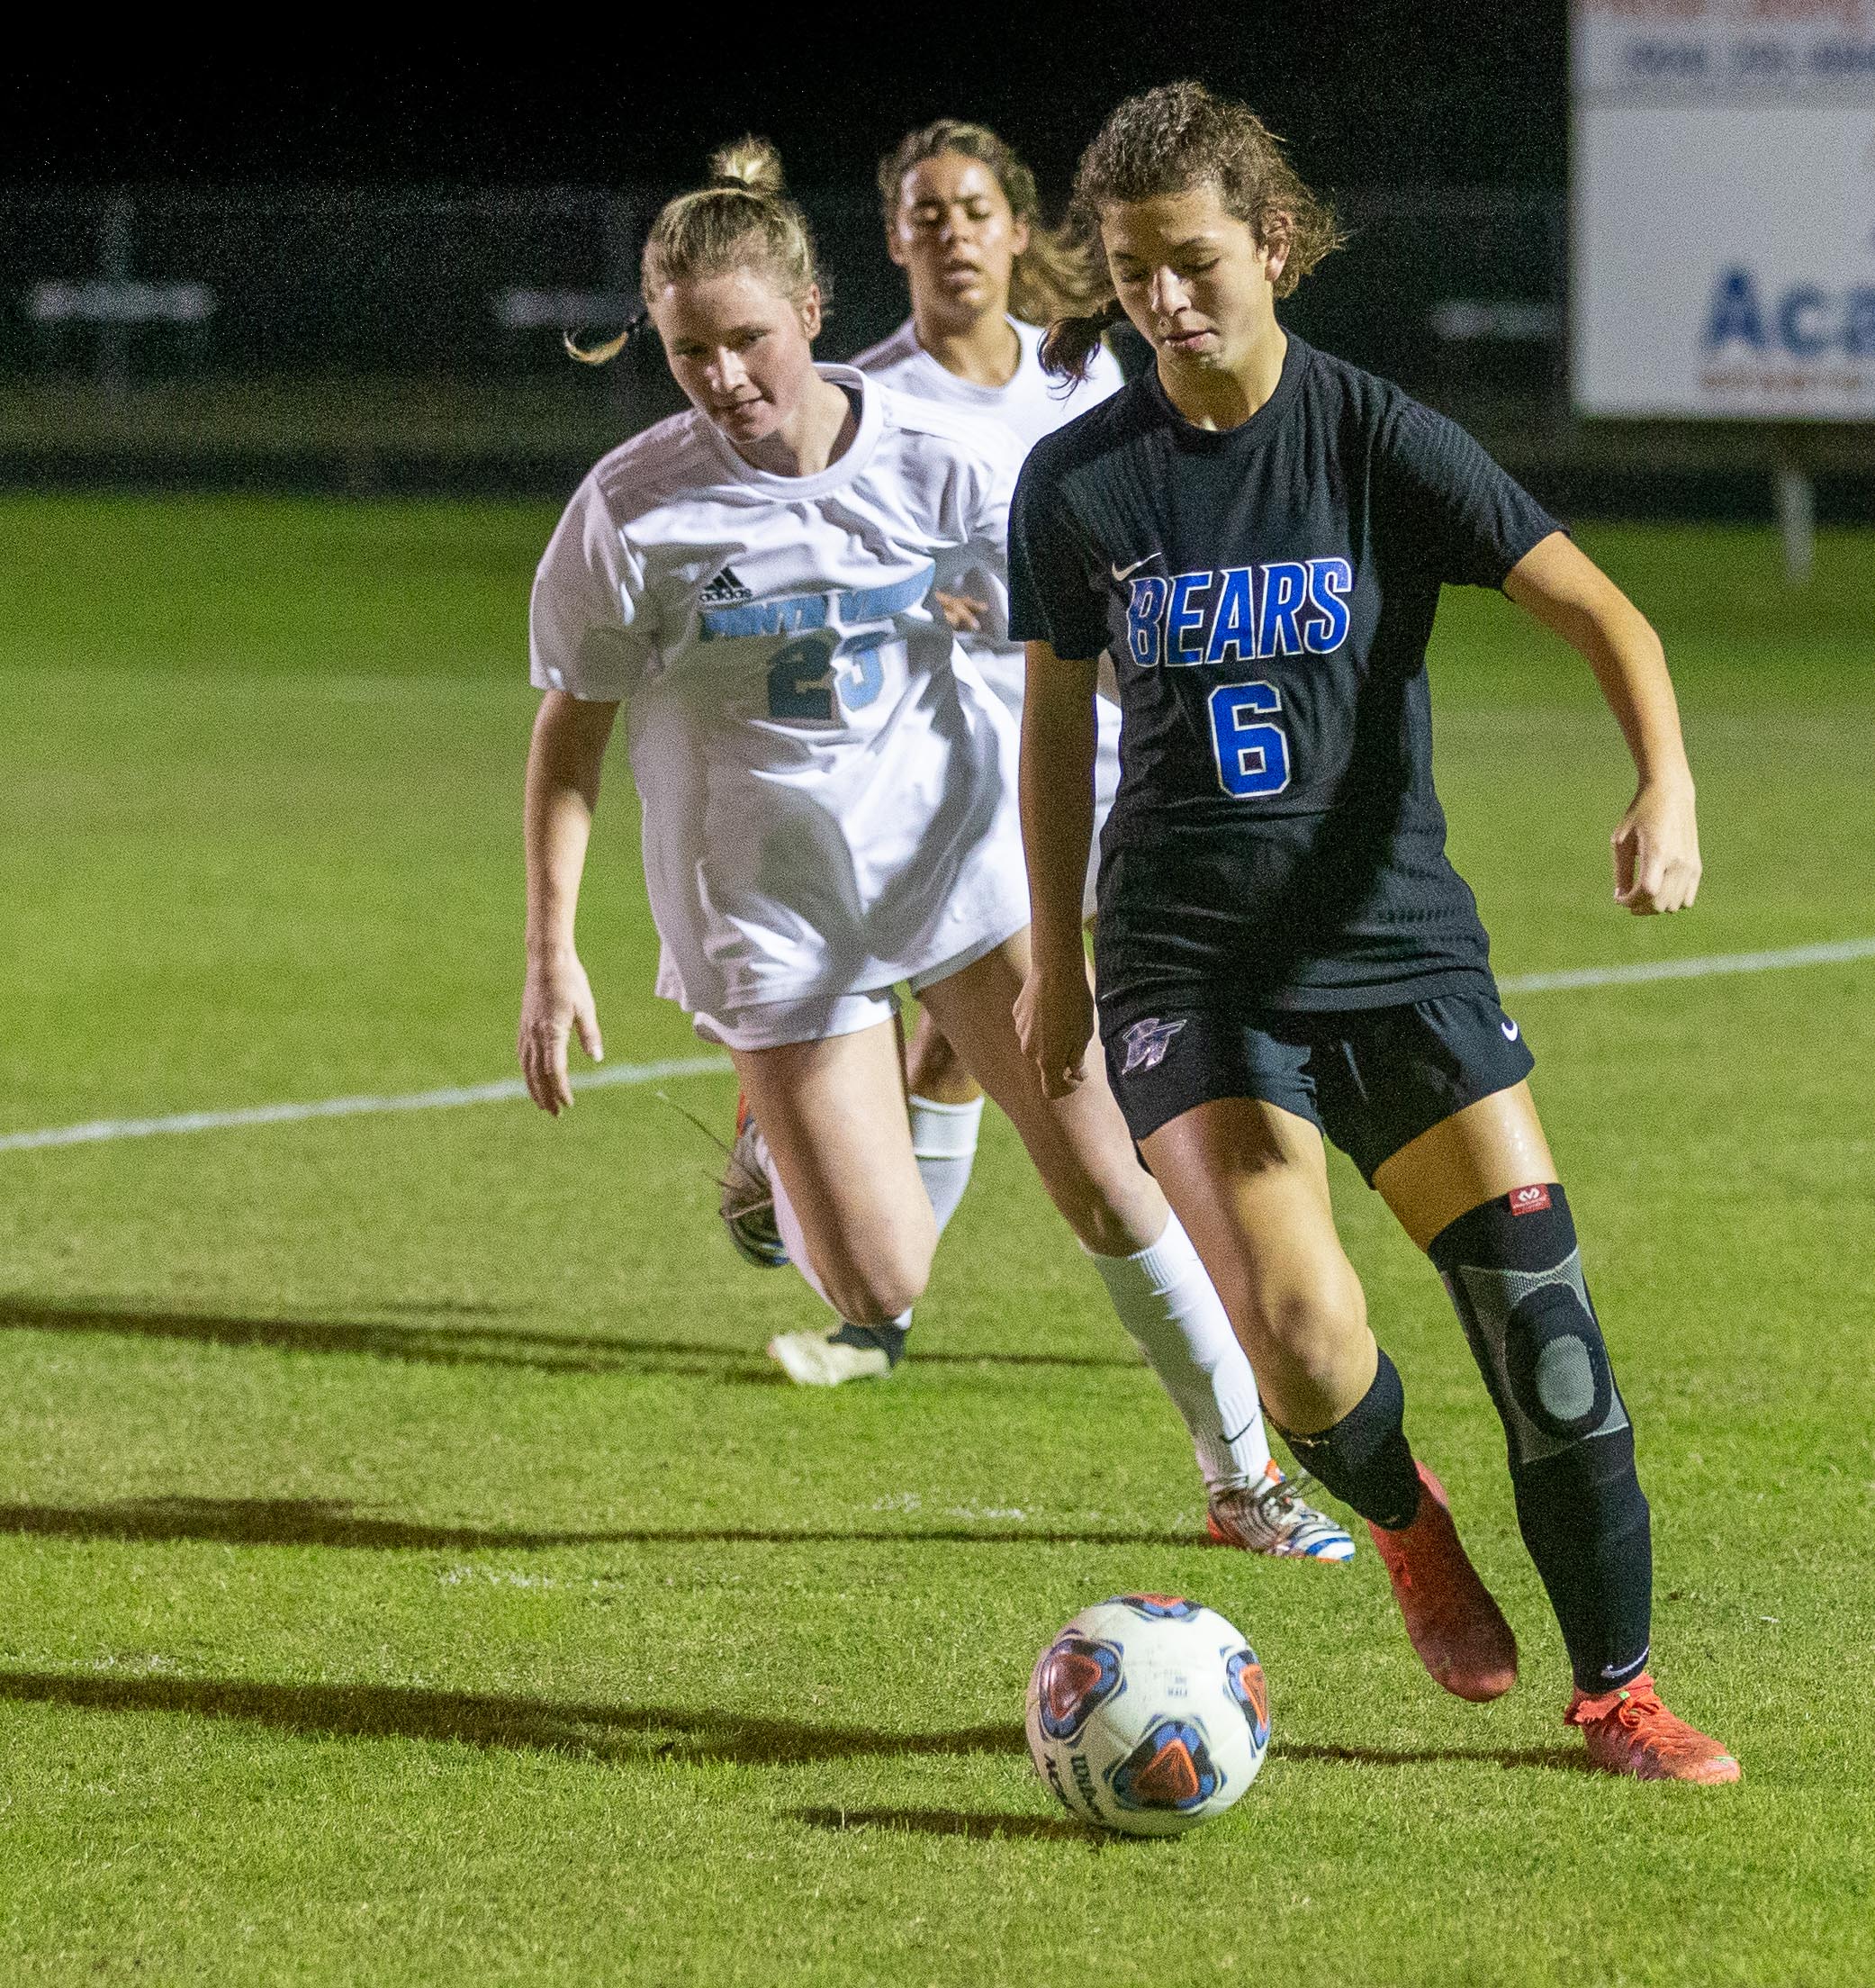 Bartram Trail girls soccer hosted Ponte Vedra in clash of rivals, reigning FHSAA state champions